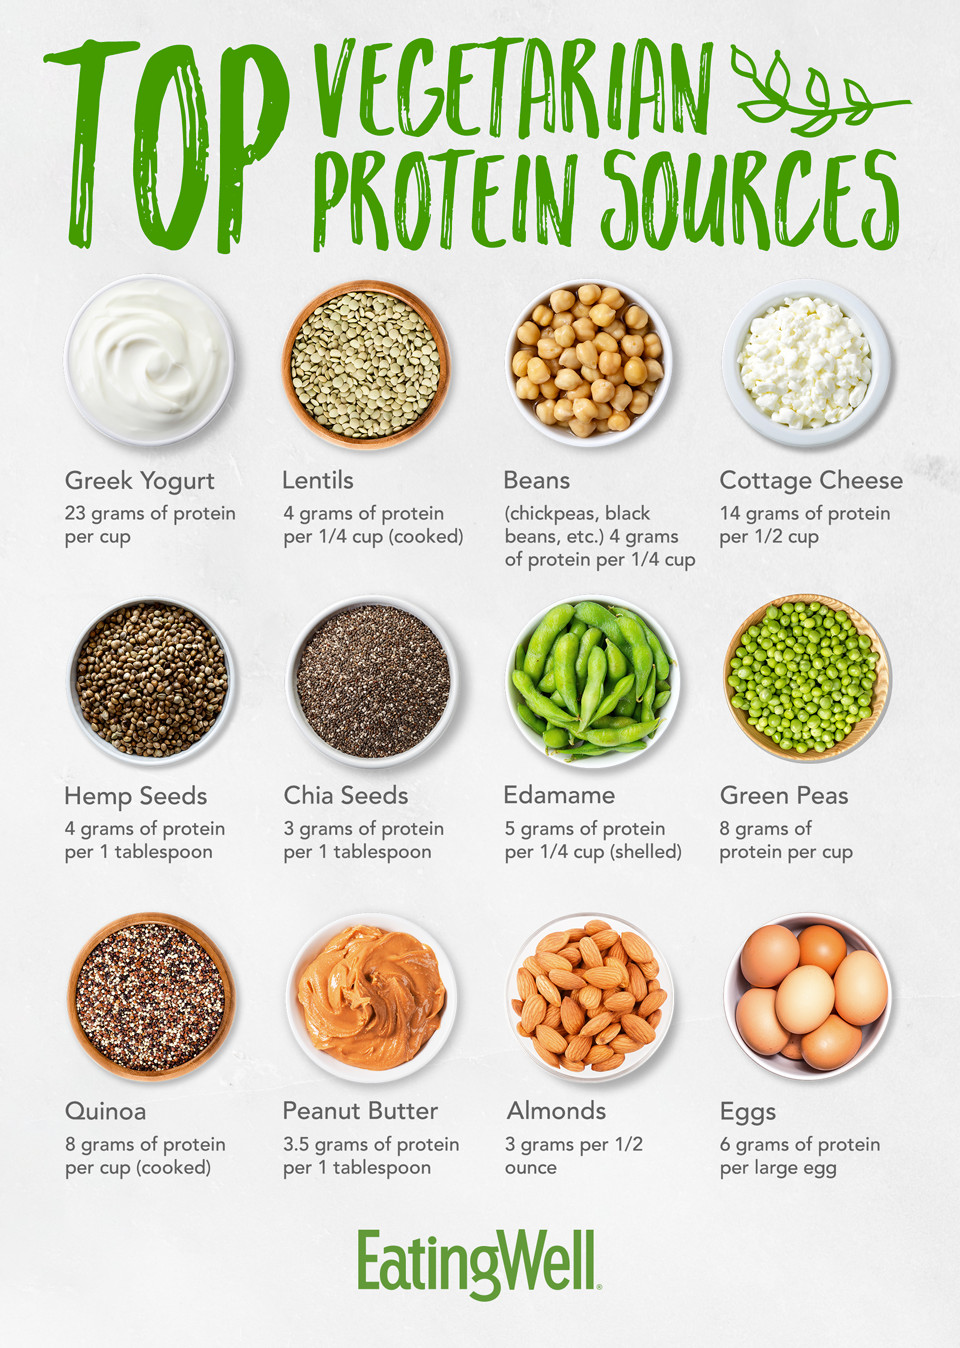 Foods With Protein For Vegetarian
 Top Ve arian Protein Sources EatingWell